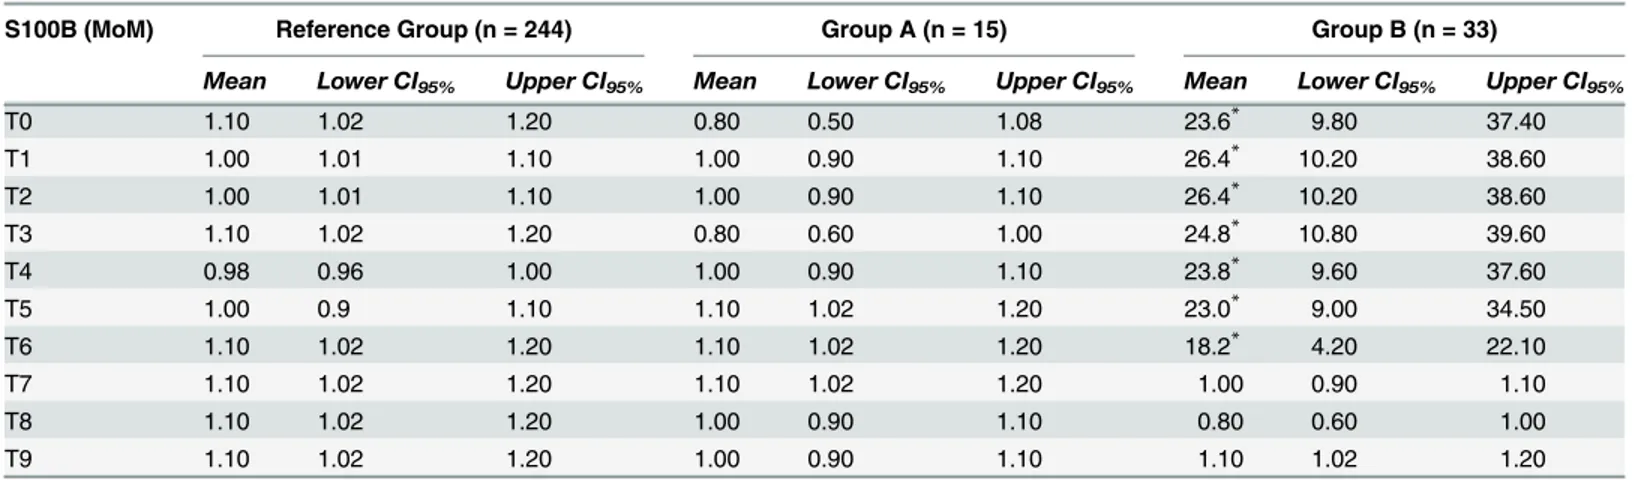 Table 3. Mean saliva S100B concentrations ( µg/mL) expressed as MoM [lower and upper 95% Conﬁdence Interval (CI)] at birth (T0) and at 4 (T1), 8 (T2), 12 (T3), 16 (T4), 20 (T5), 24 (T6), 48 (T7), 72 (T8) and 96 (T9) hours after birth in Reference Group (n 